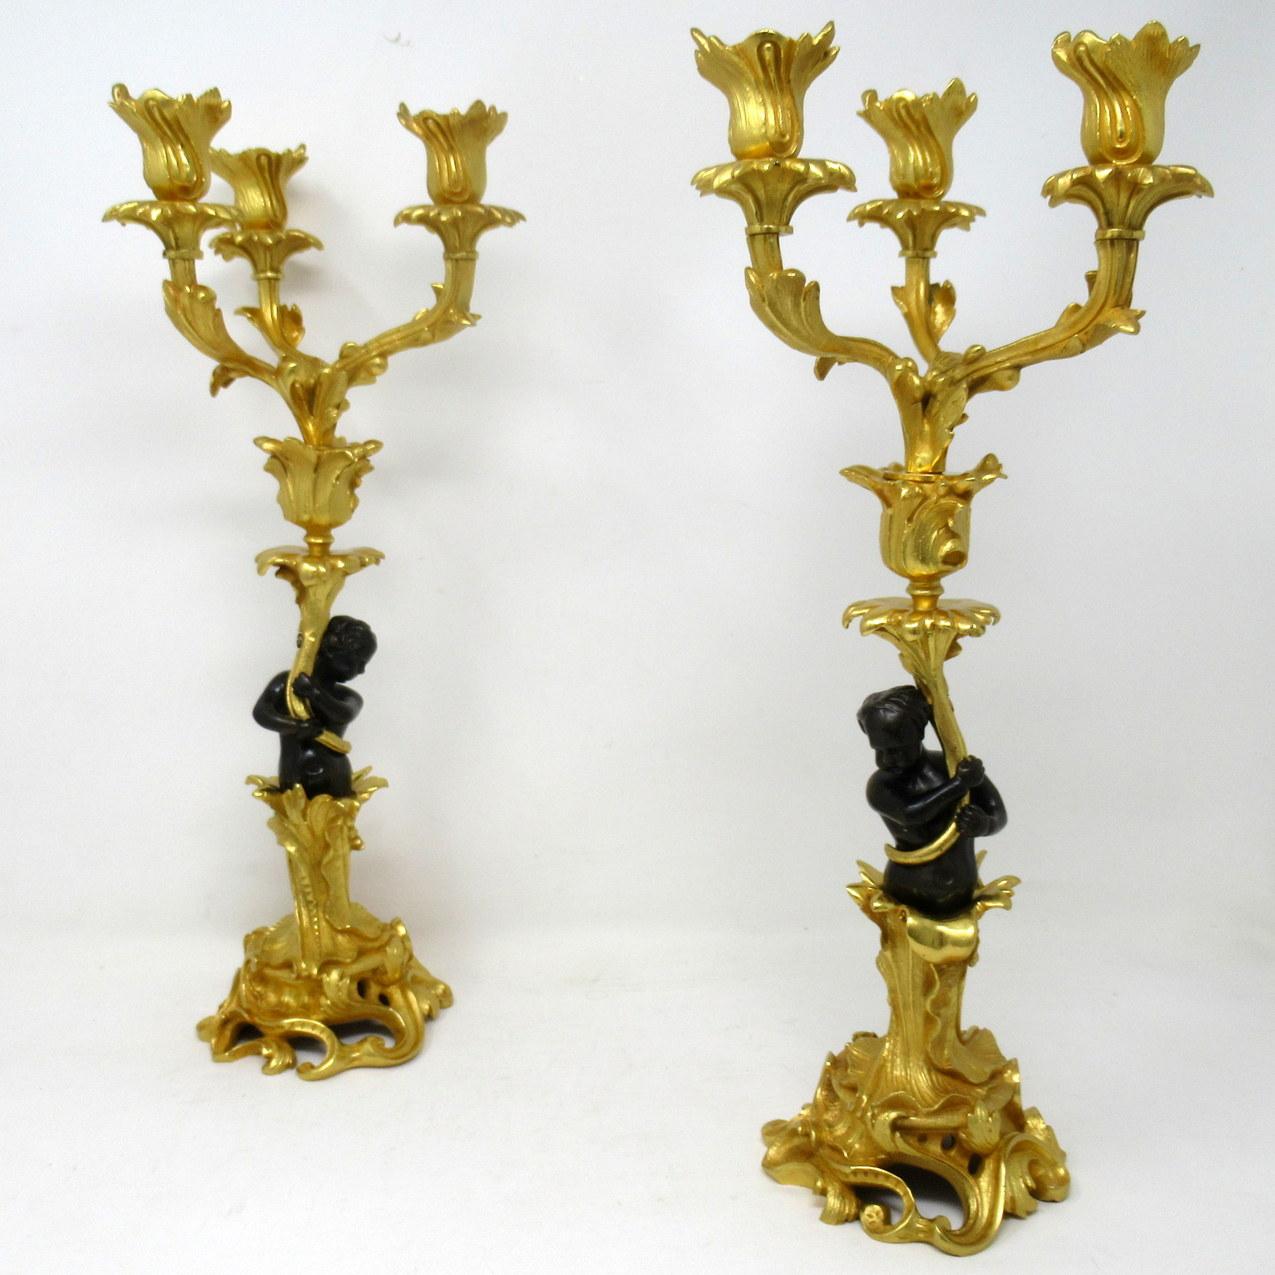 A fine pair of stylish and imposing French ormolu and patinated bronze three-light table or mantel (fireplace) candelabras or single light candlesticks of outstanding quality, mid to late 19th century.

Each with a central standing solid bronze